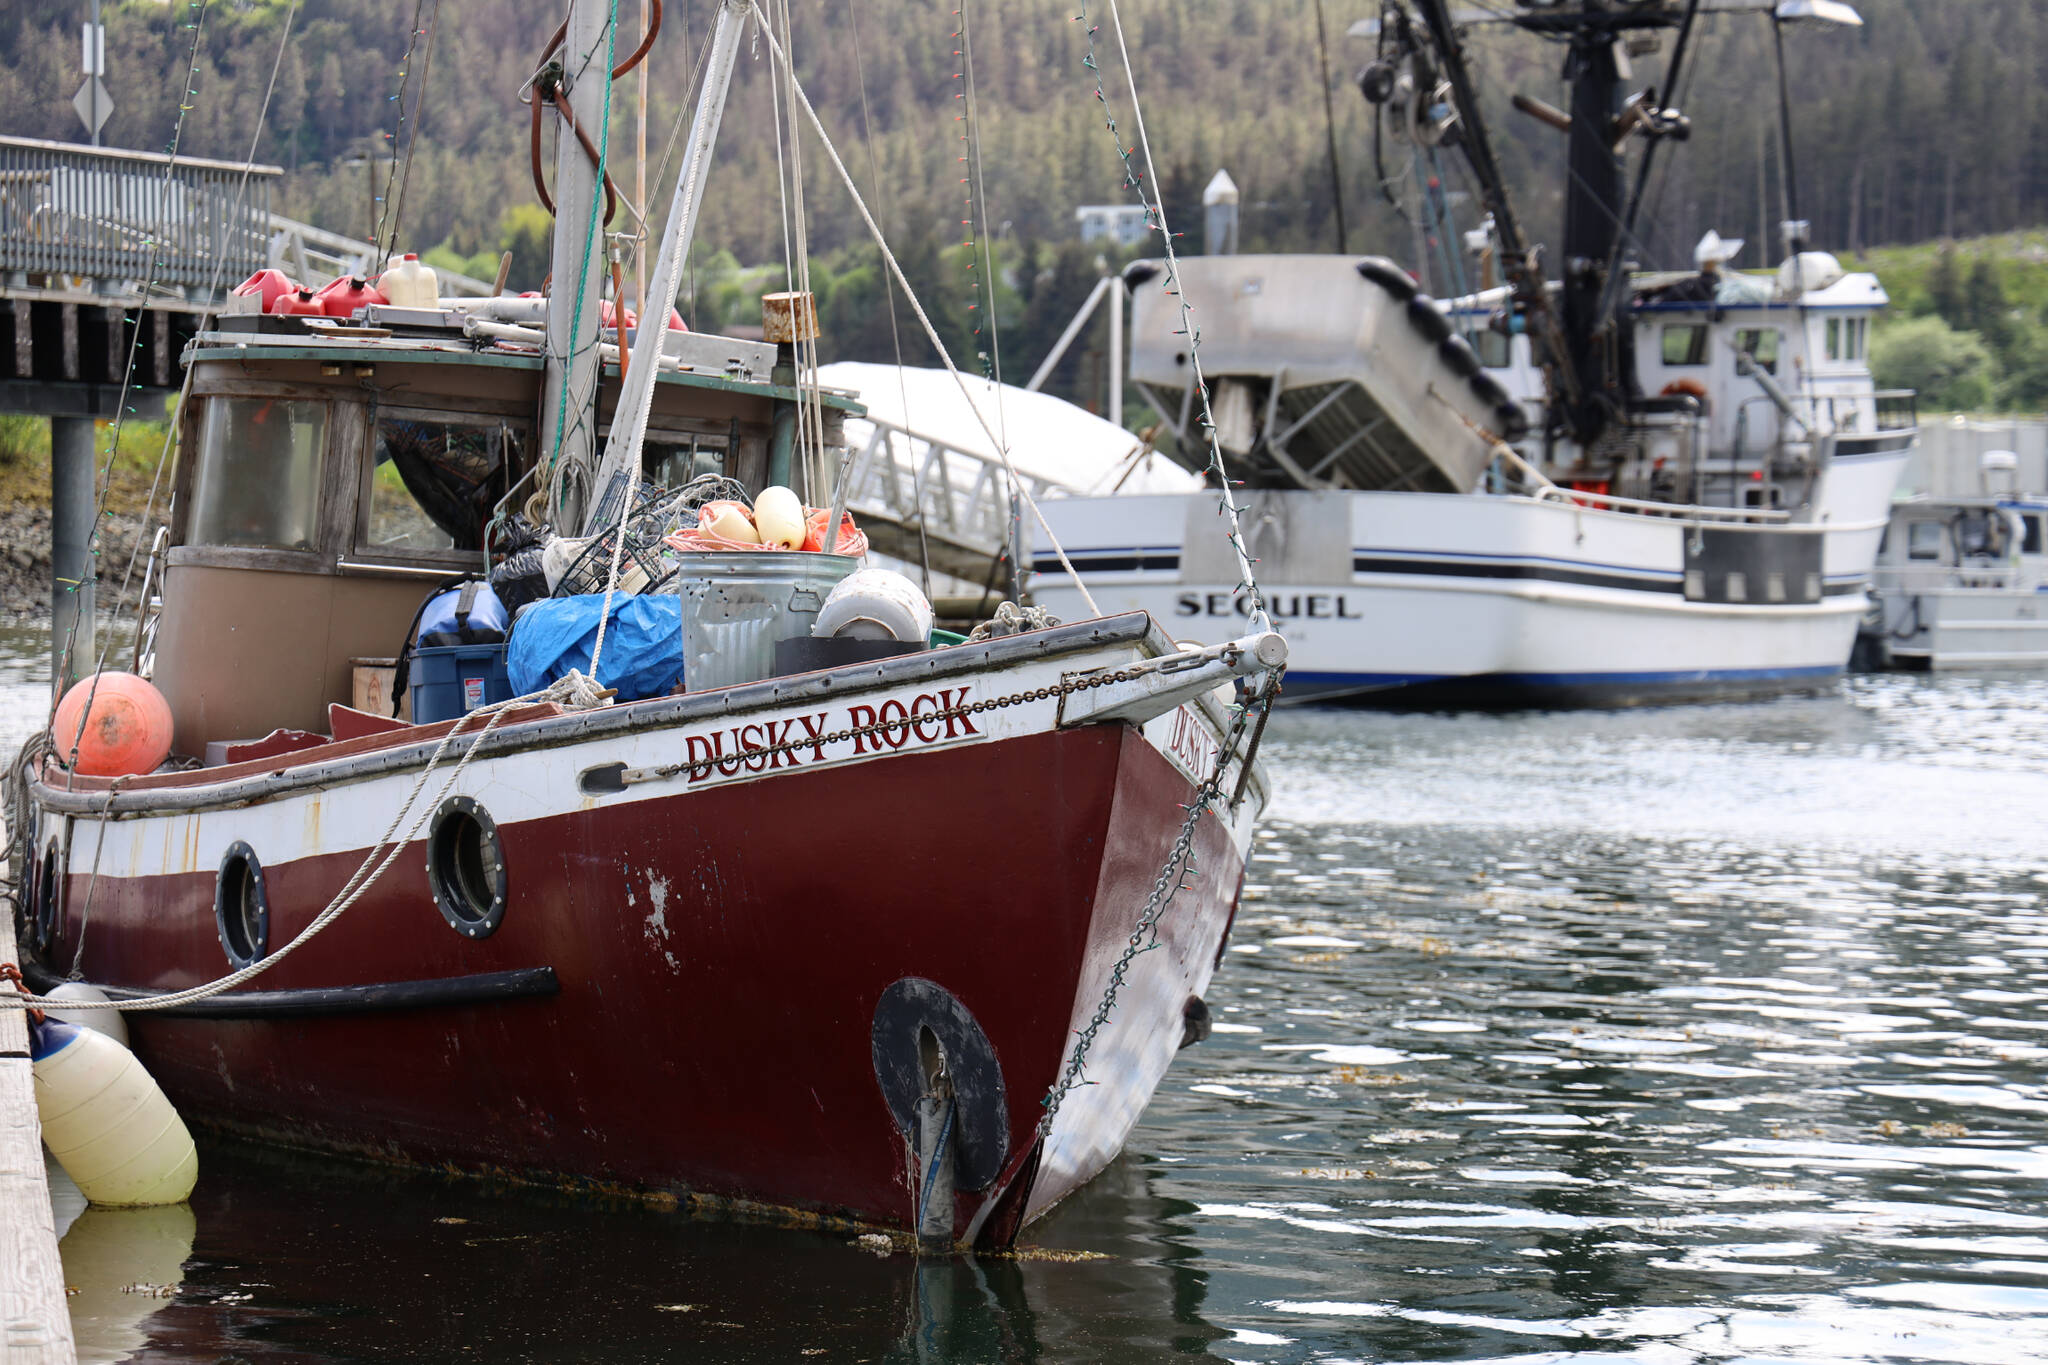 The Dusky Rock sits at Aurora Harbor on the morning of Saturday, June 3. The vessel was towed there from Sandy Beach on the evening of Friday, June 2, after three people died within a three-day period aboard the vessel while anchored offshore. (Clarise Larson / Juneau Empire File)